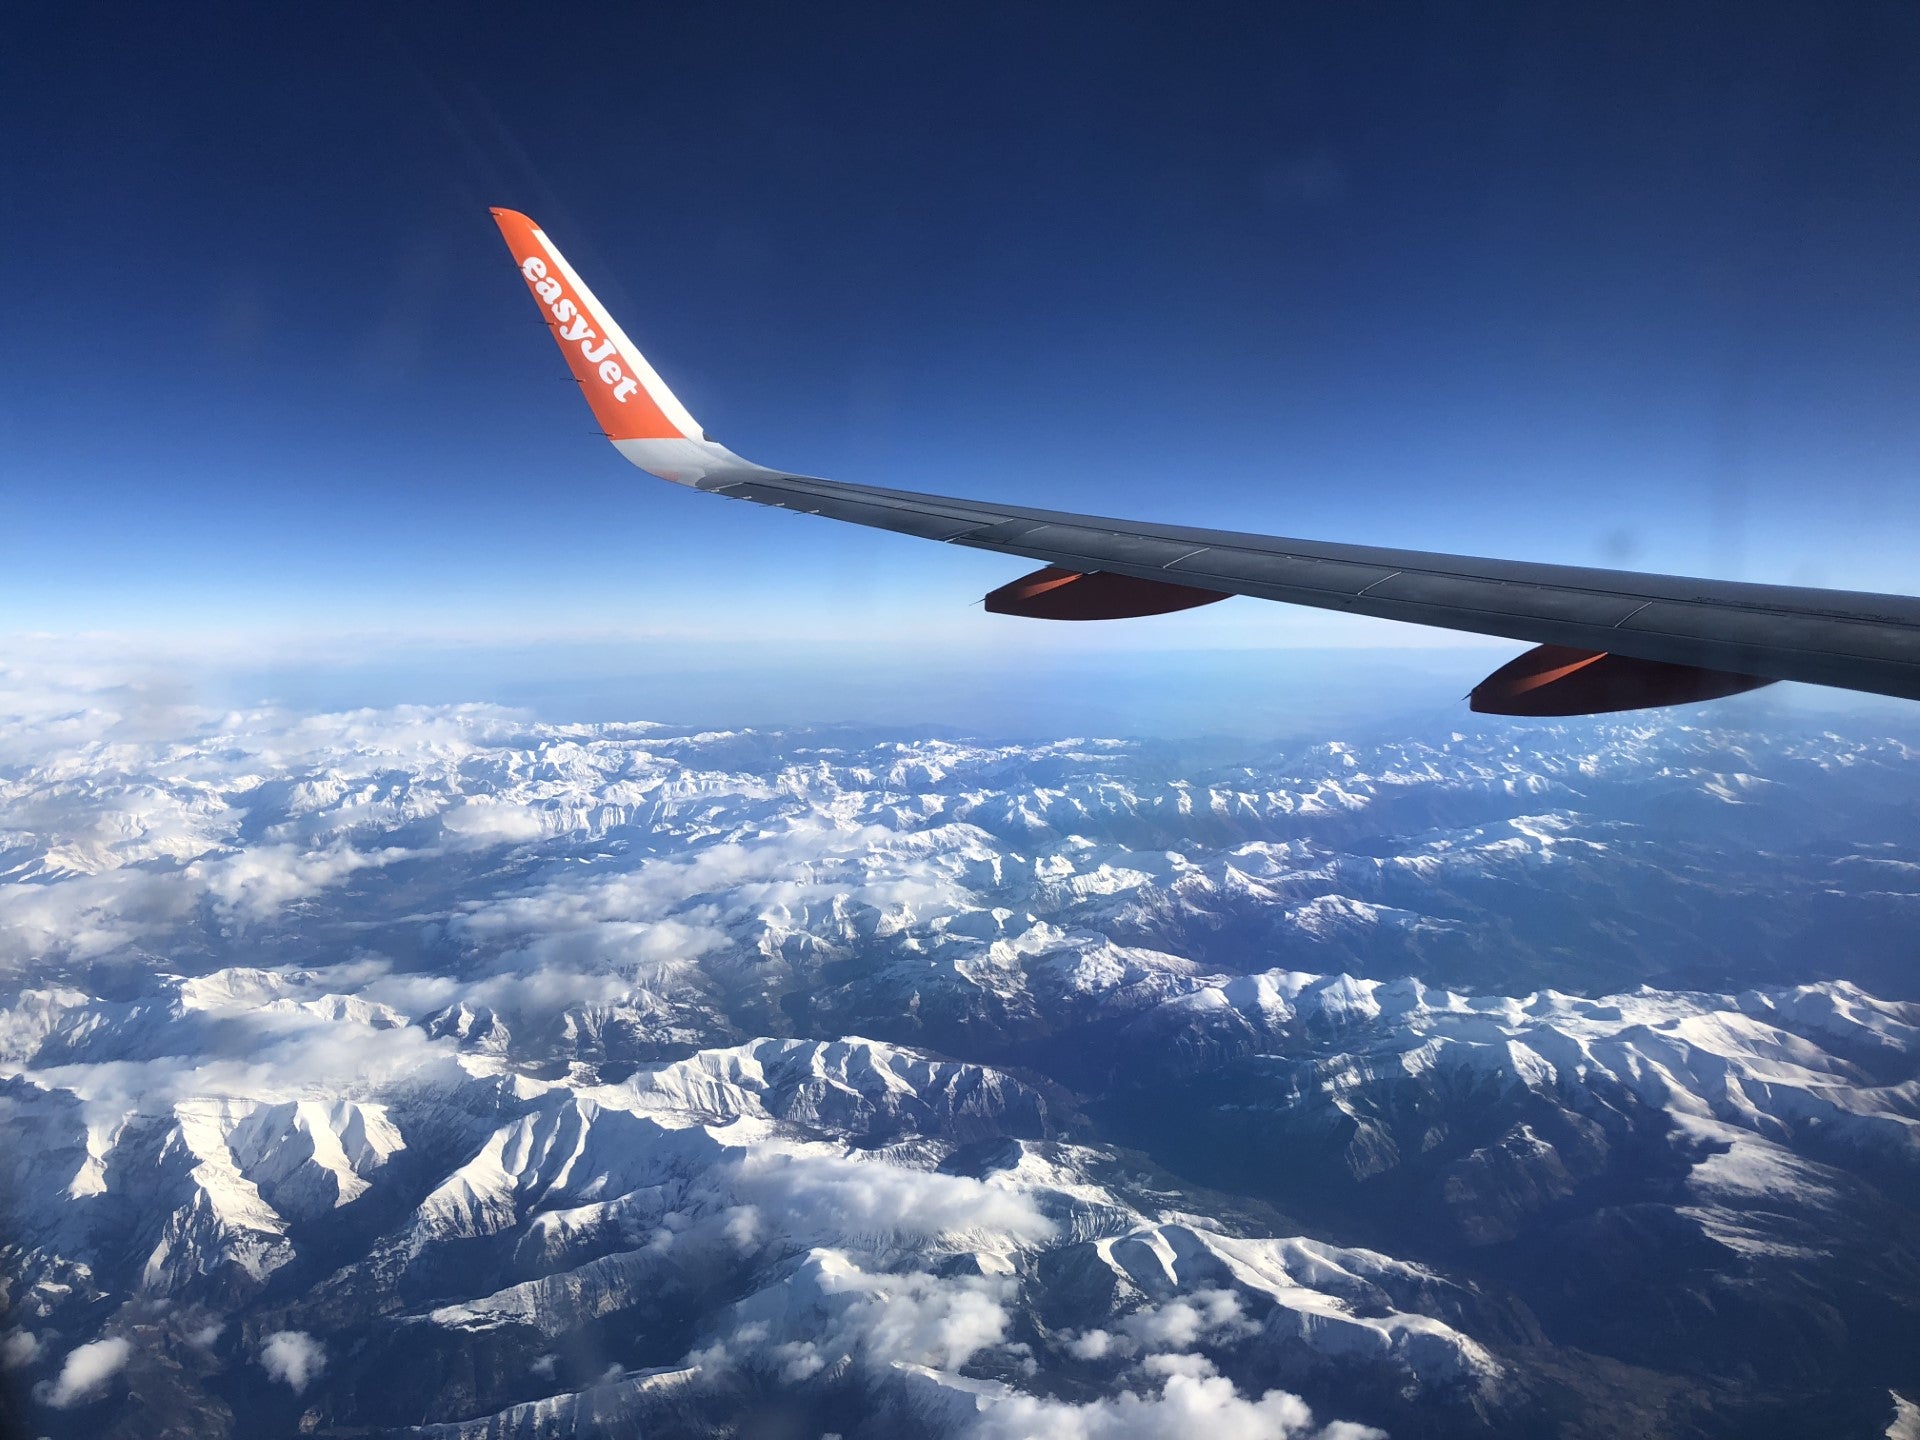 Blue sky thinking: I adore easyJet Plus, but not enough to have flown over the Alps with the airline this week